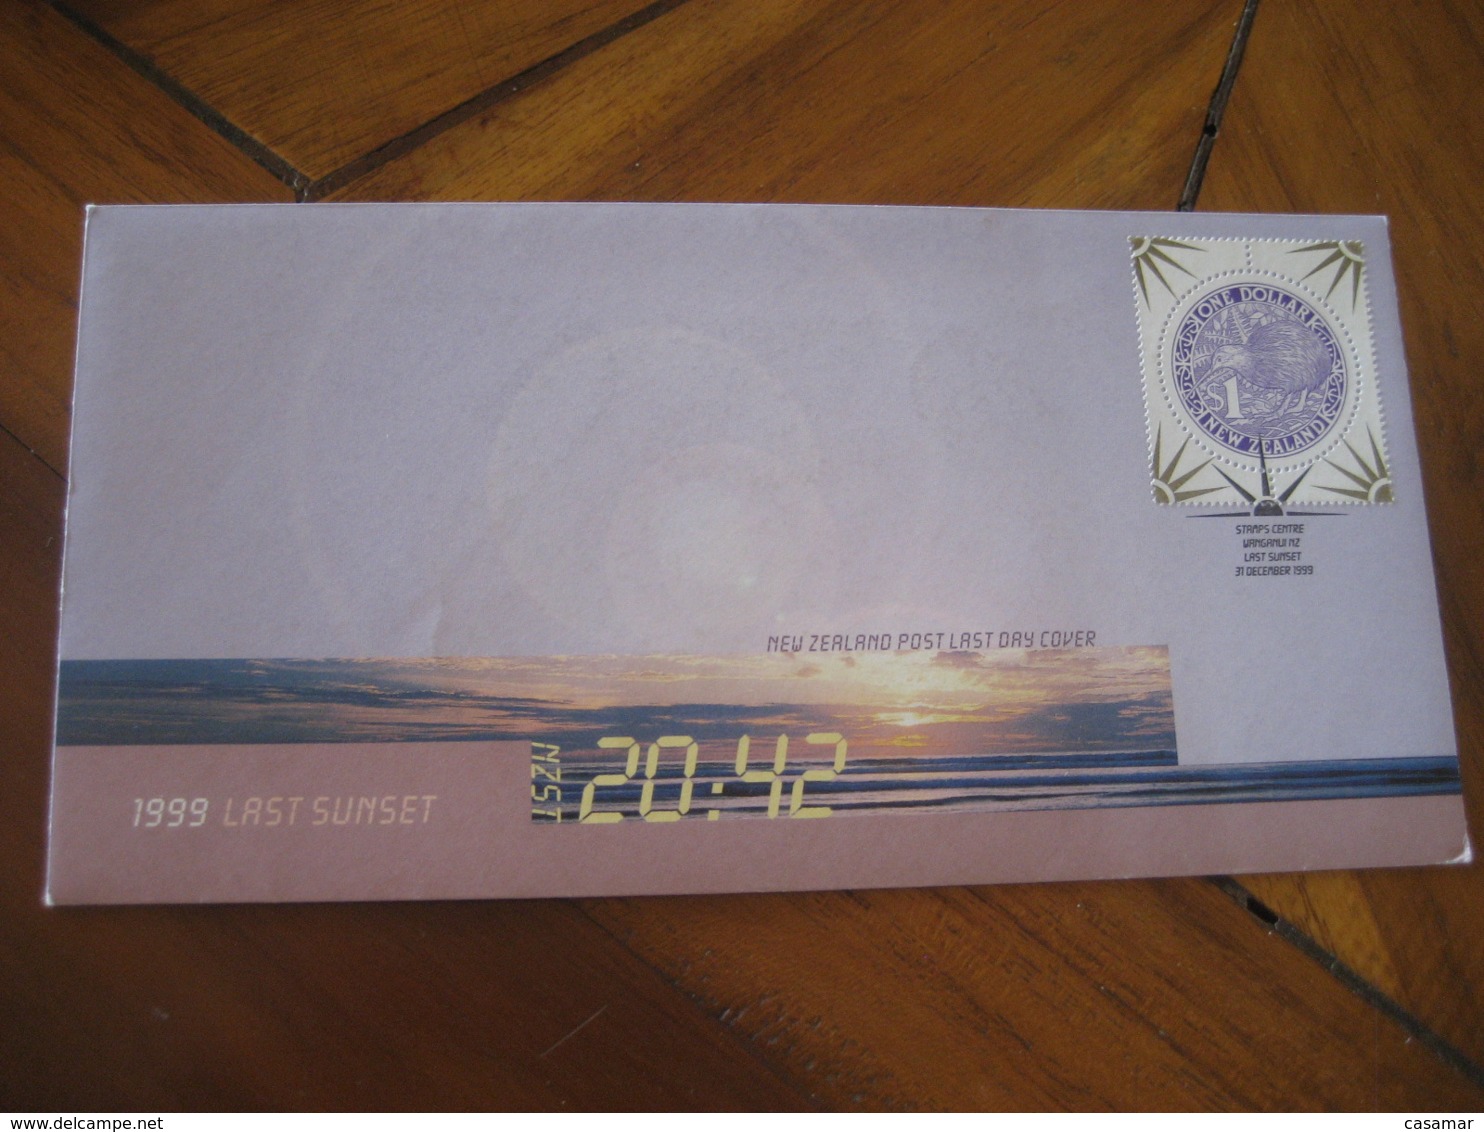 WANGANUI 1999 Meteorology Space Spatial LAST SUNSET 20:42 Invercargill Cancel Postal Stationery Cover NEW ZEALAND - Covers & Documents